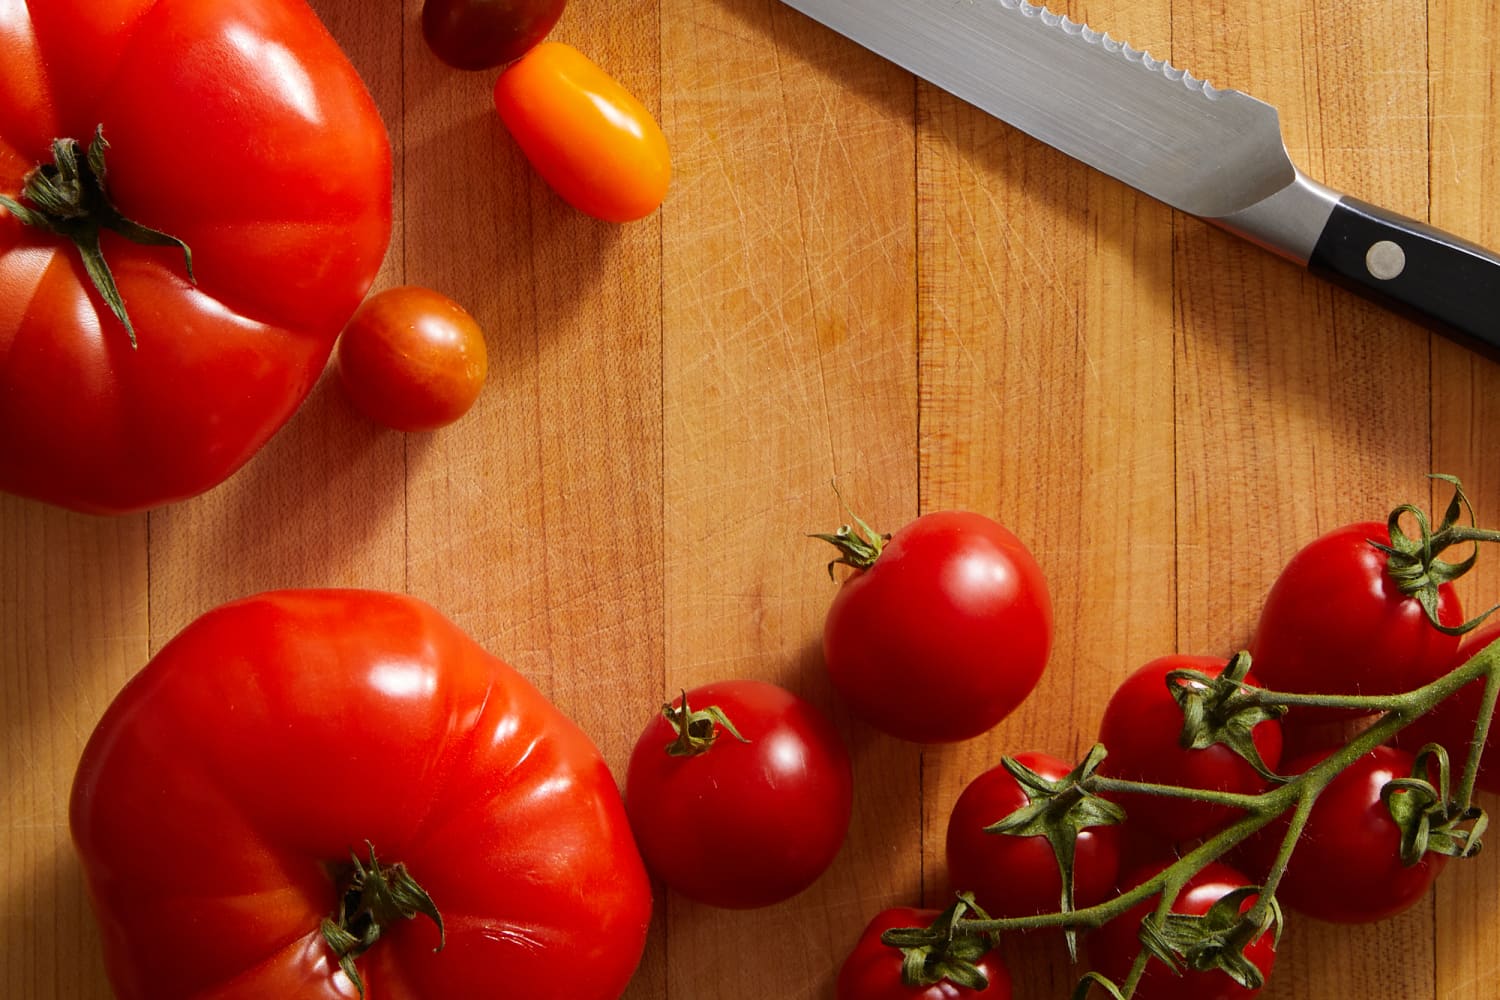 What are the best tomatoes for dicing? - Foodly